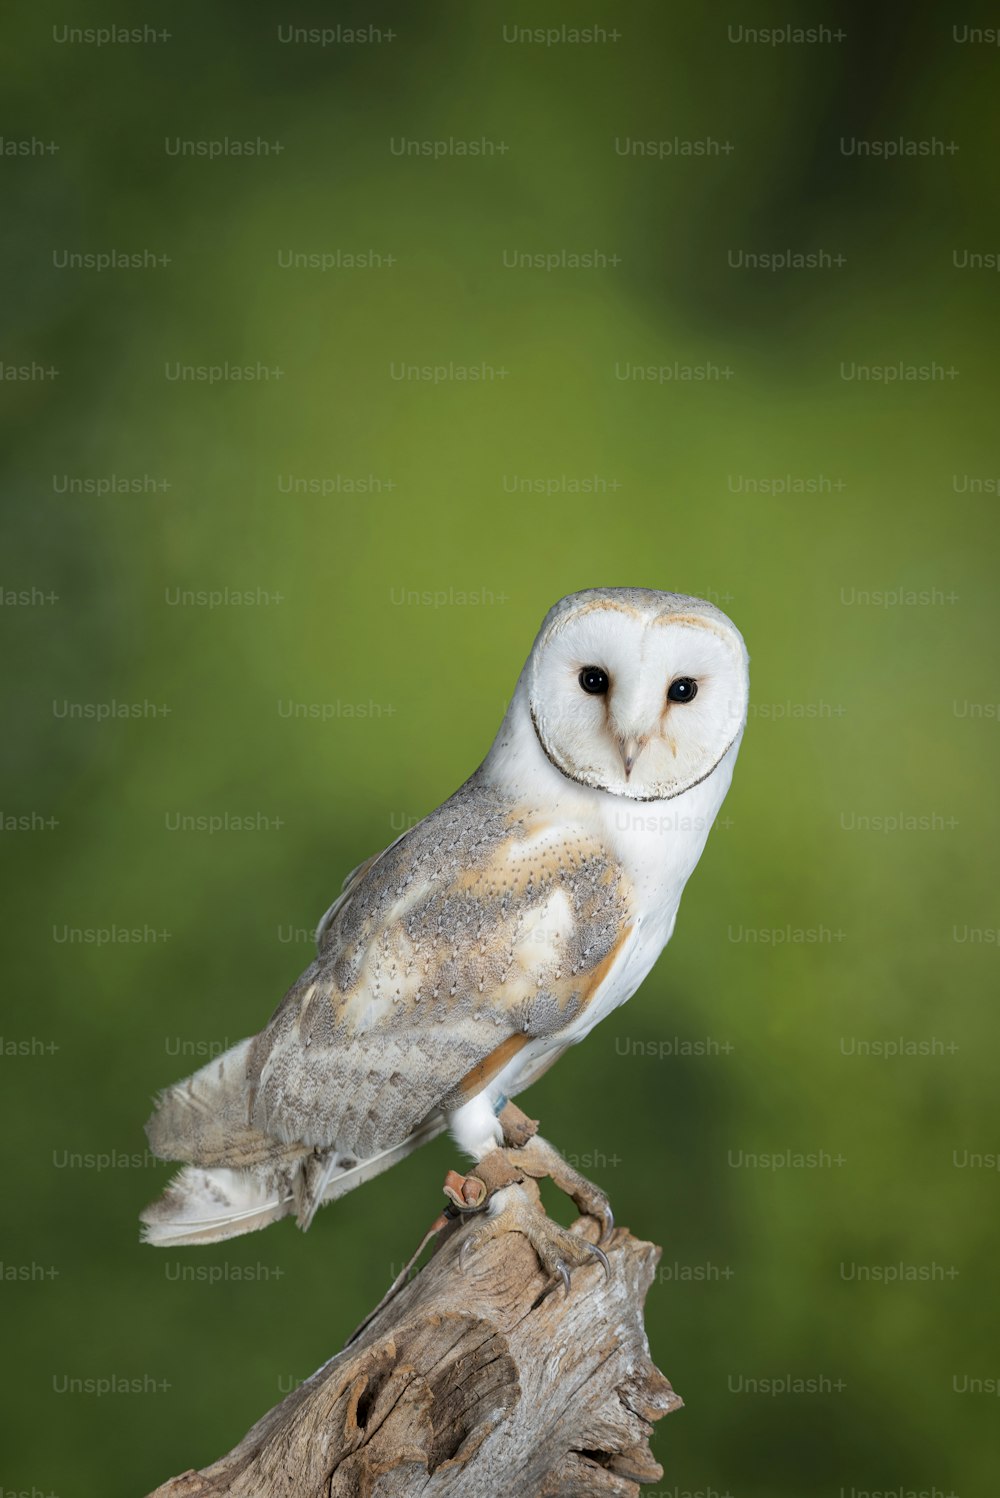 Beautiful portrait of Snowy Owl Bubo Scandiacus in studio setting with mottled green nature background